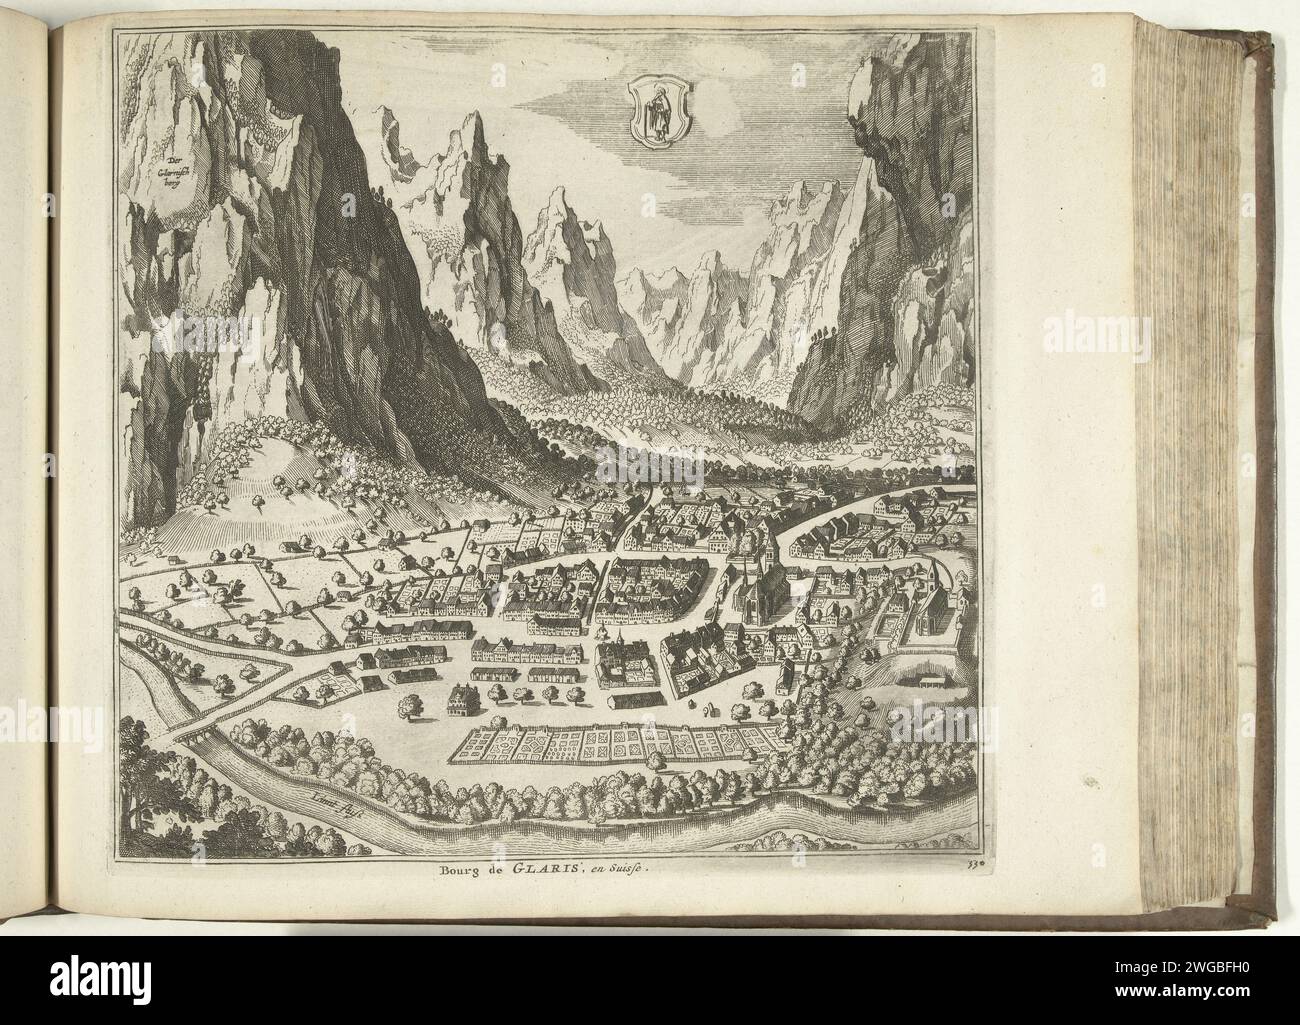 View of Glarus, 1726, 1726 print View on the town of Glarus located in a valley between the mountains in Switzerland. Plate no. 330 in Part XIV of the print work: Les Forces de l'Europe, Asie, Afrique et Amerique ... Comme Aussi Les Cartes des Côtes de France et d'Espagne from 1726, this second part with 271 by hand numbered Plates of renowned strong cities and fortresses in the context of the Spanish War of Succession 1701-1713. For the most part, these records have been copied to the anonymous French records of renowned strong cities and forces: in Les Forces de l'Europe and in: Le Theater d Stock Photo